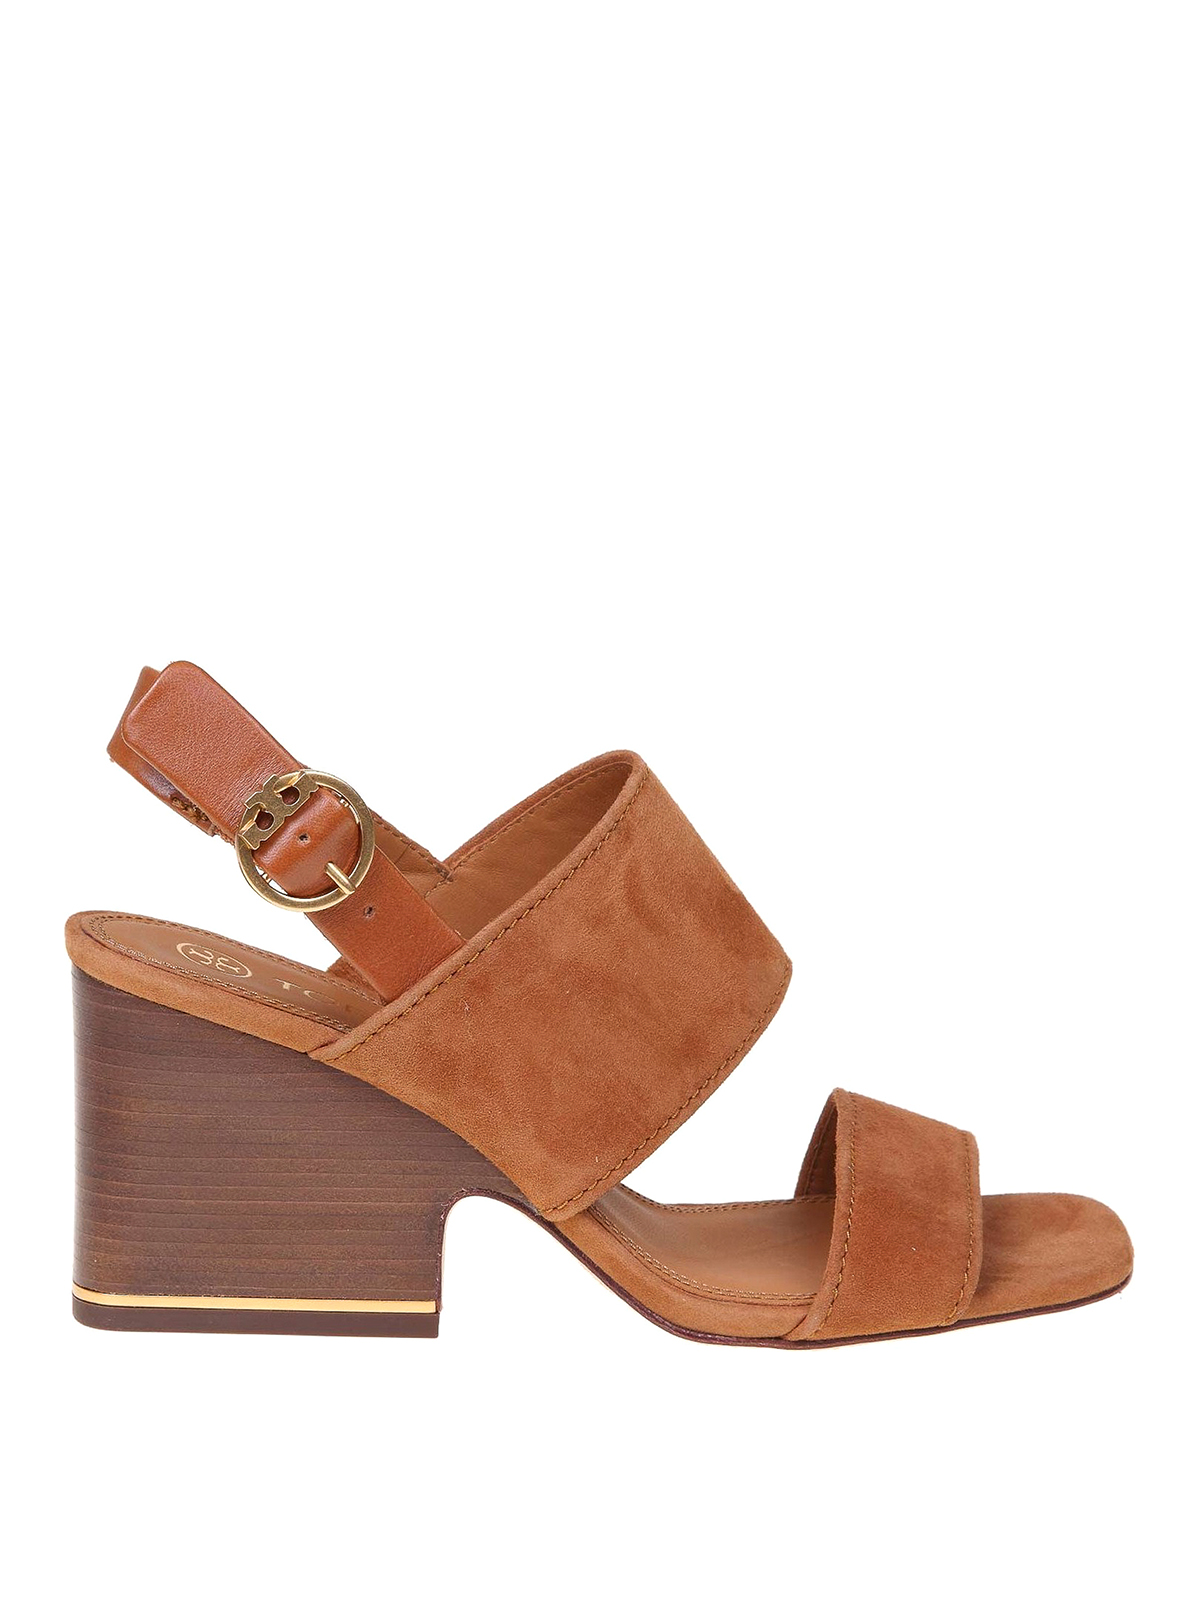 Sandals Tory Burch - Selby sandals - 64760218 | Shop online at iKRIX